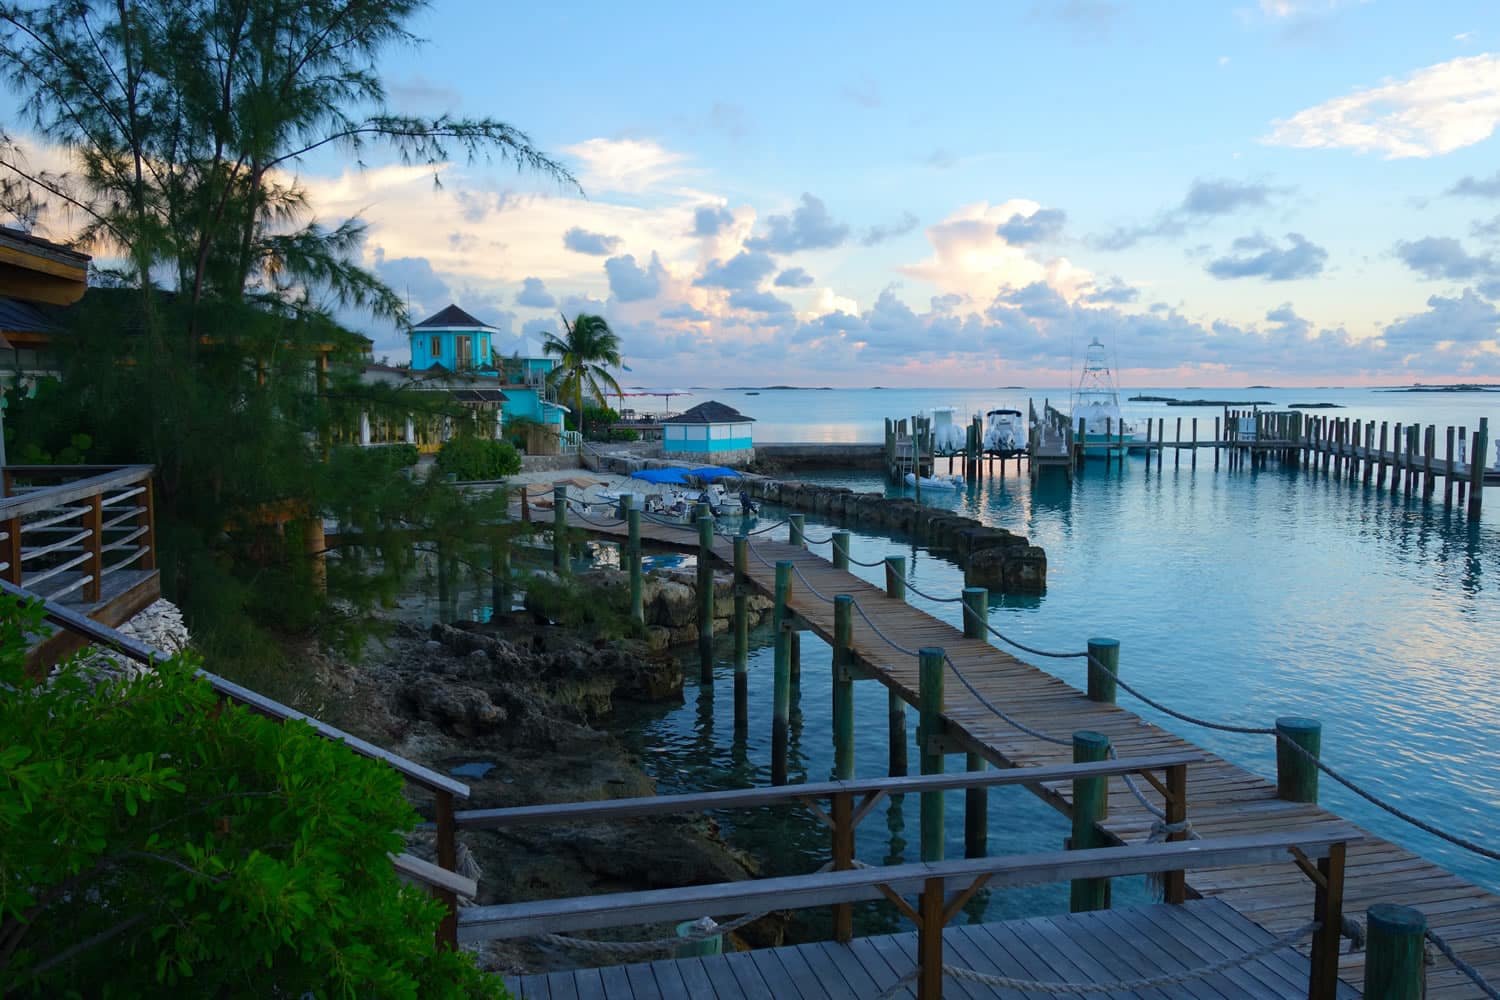 A wooden walkway leading to a dock in the middle of the ocean, nestled in the breathtaking scenery of Staniel Cay, The Bahamas.